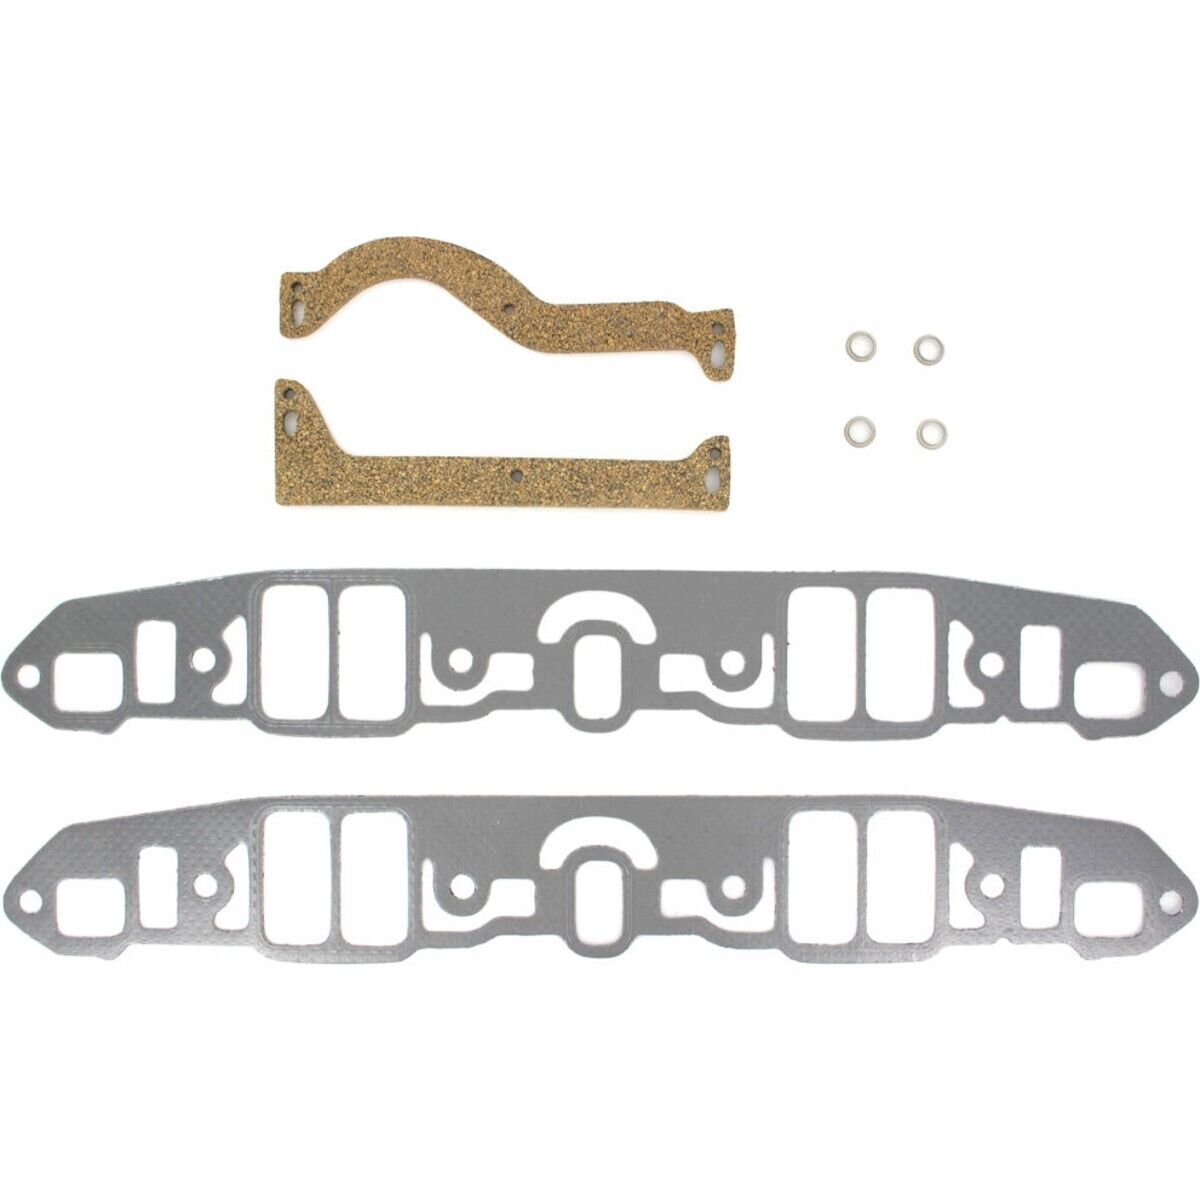 AMS2581 APEX Set Intake Manifold Gaskets for Le Baron Town and Country Ram Van